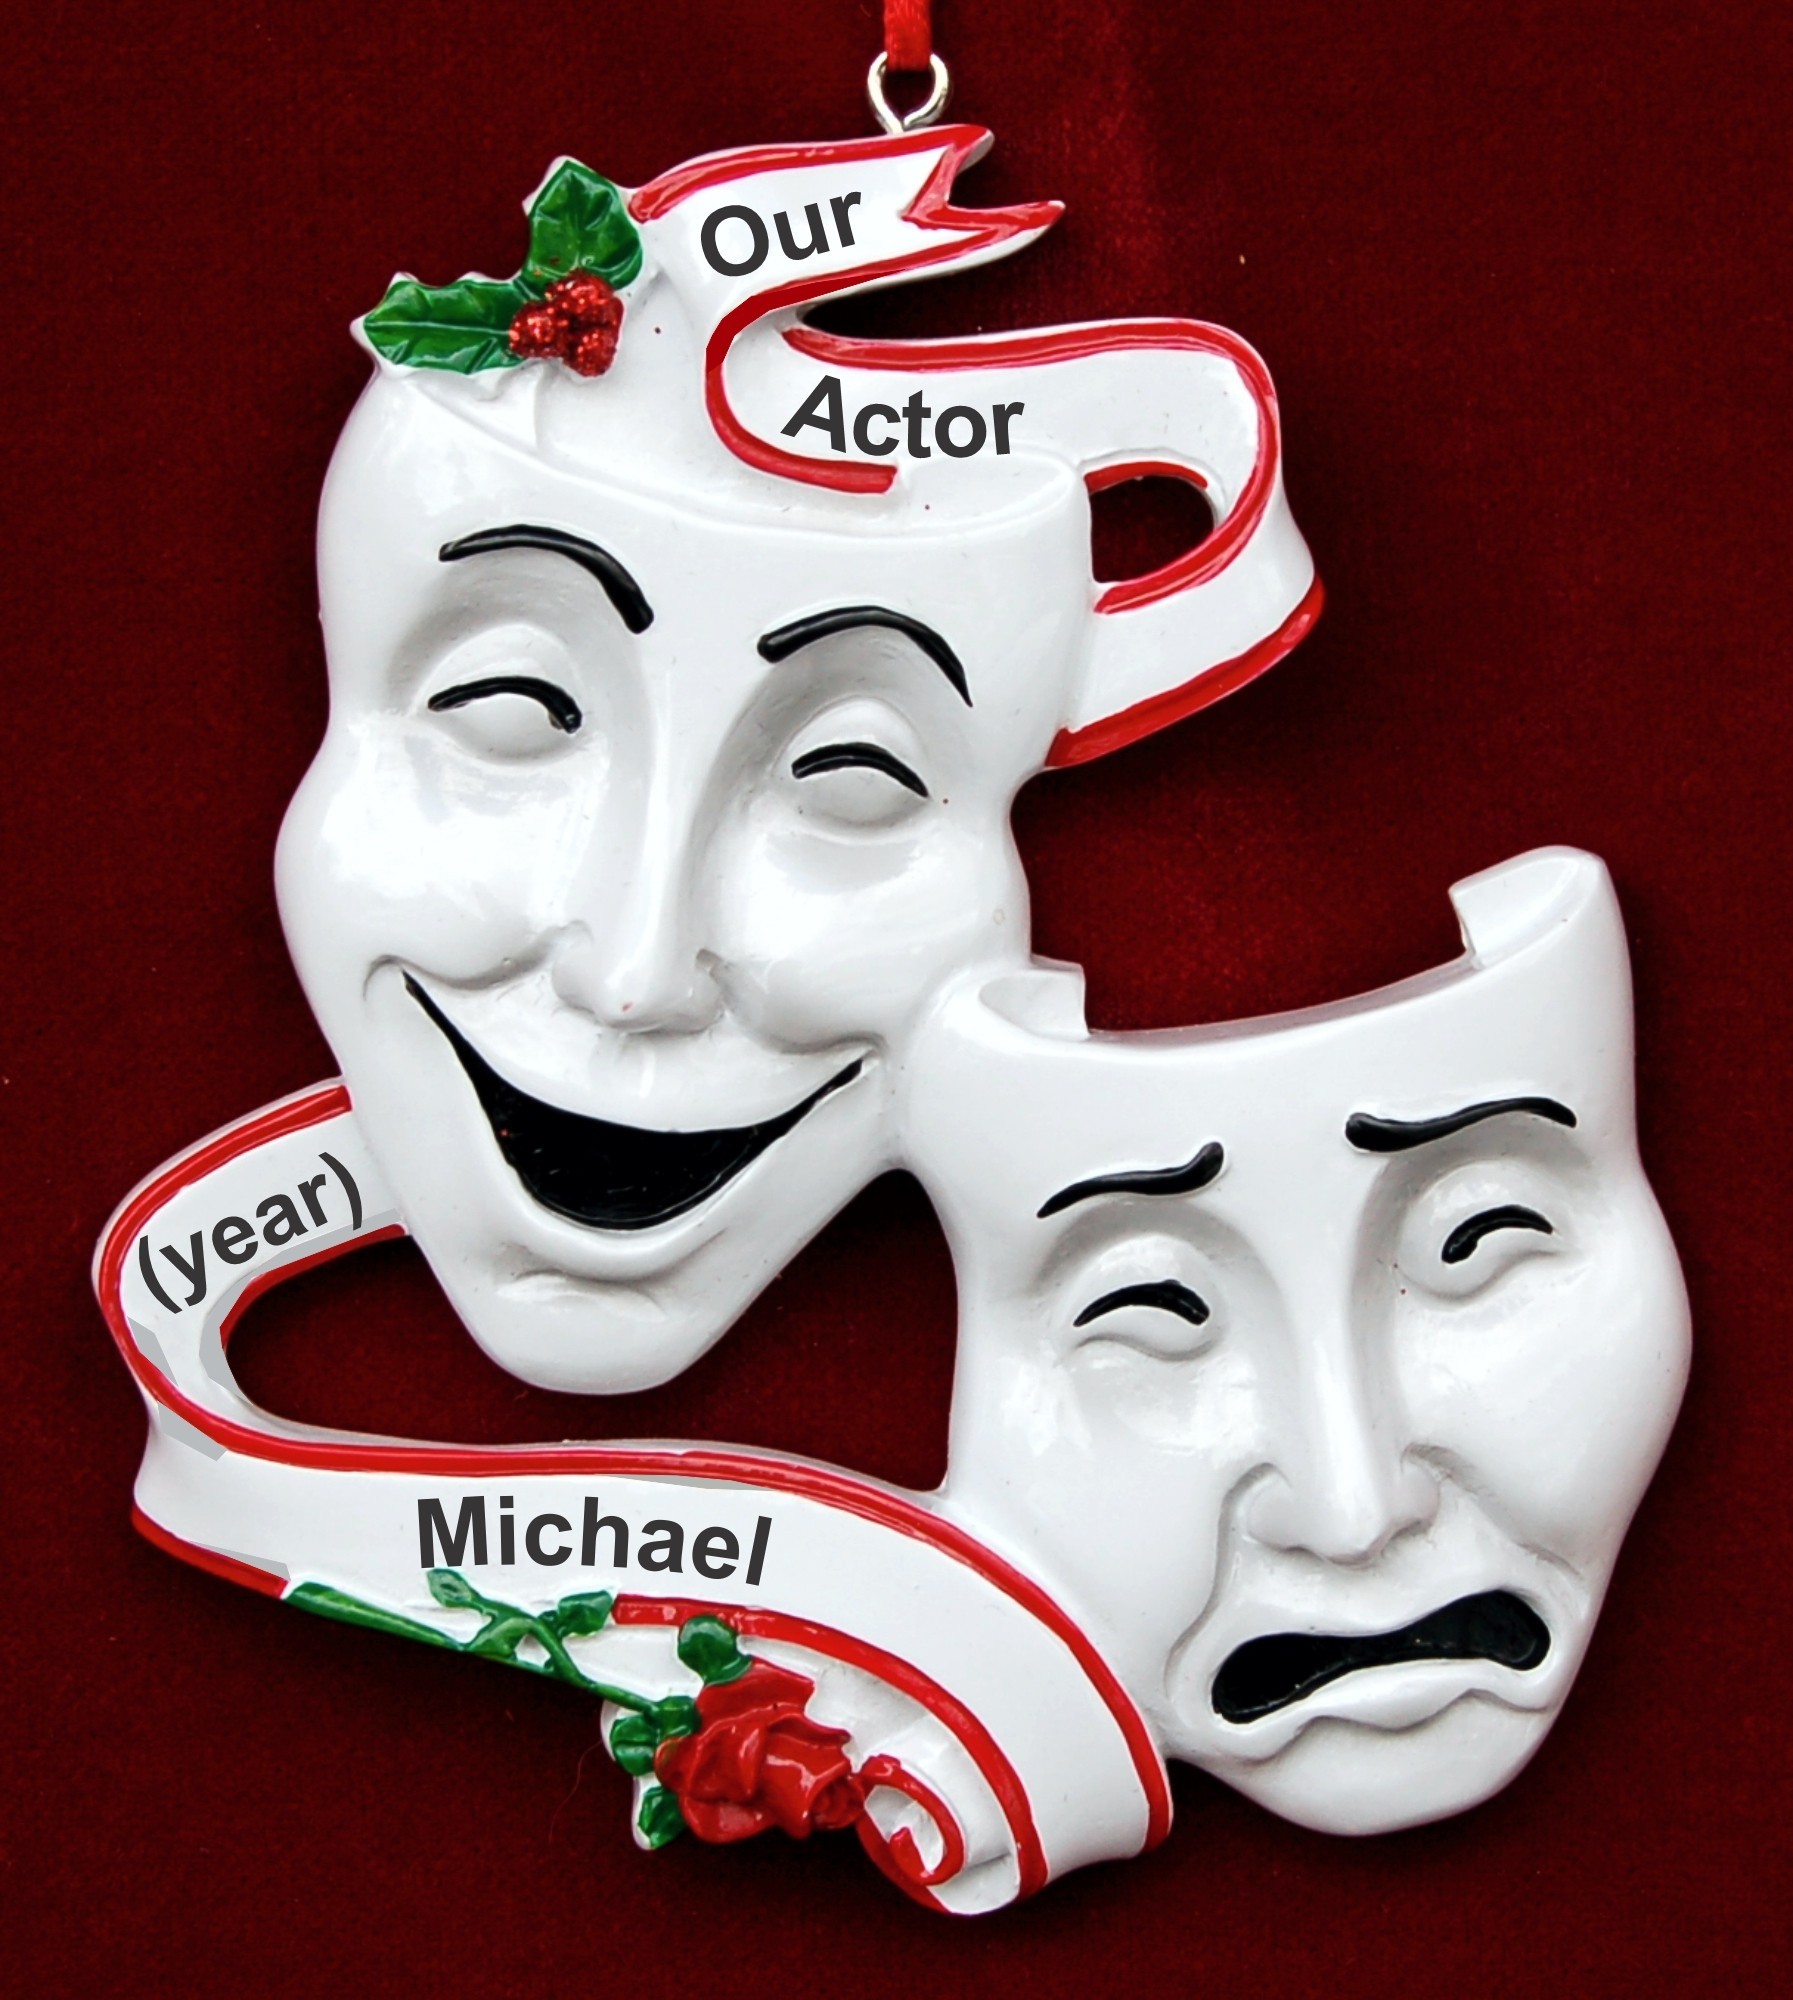 Personalized The Theater Christmas Ornament Personalized by Russell Rhodes